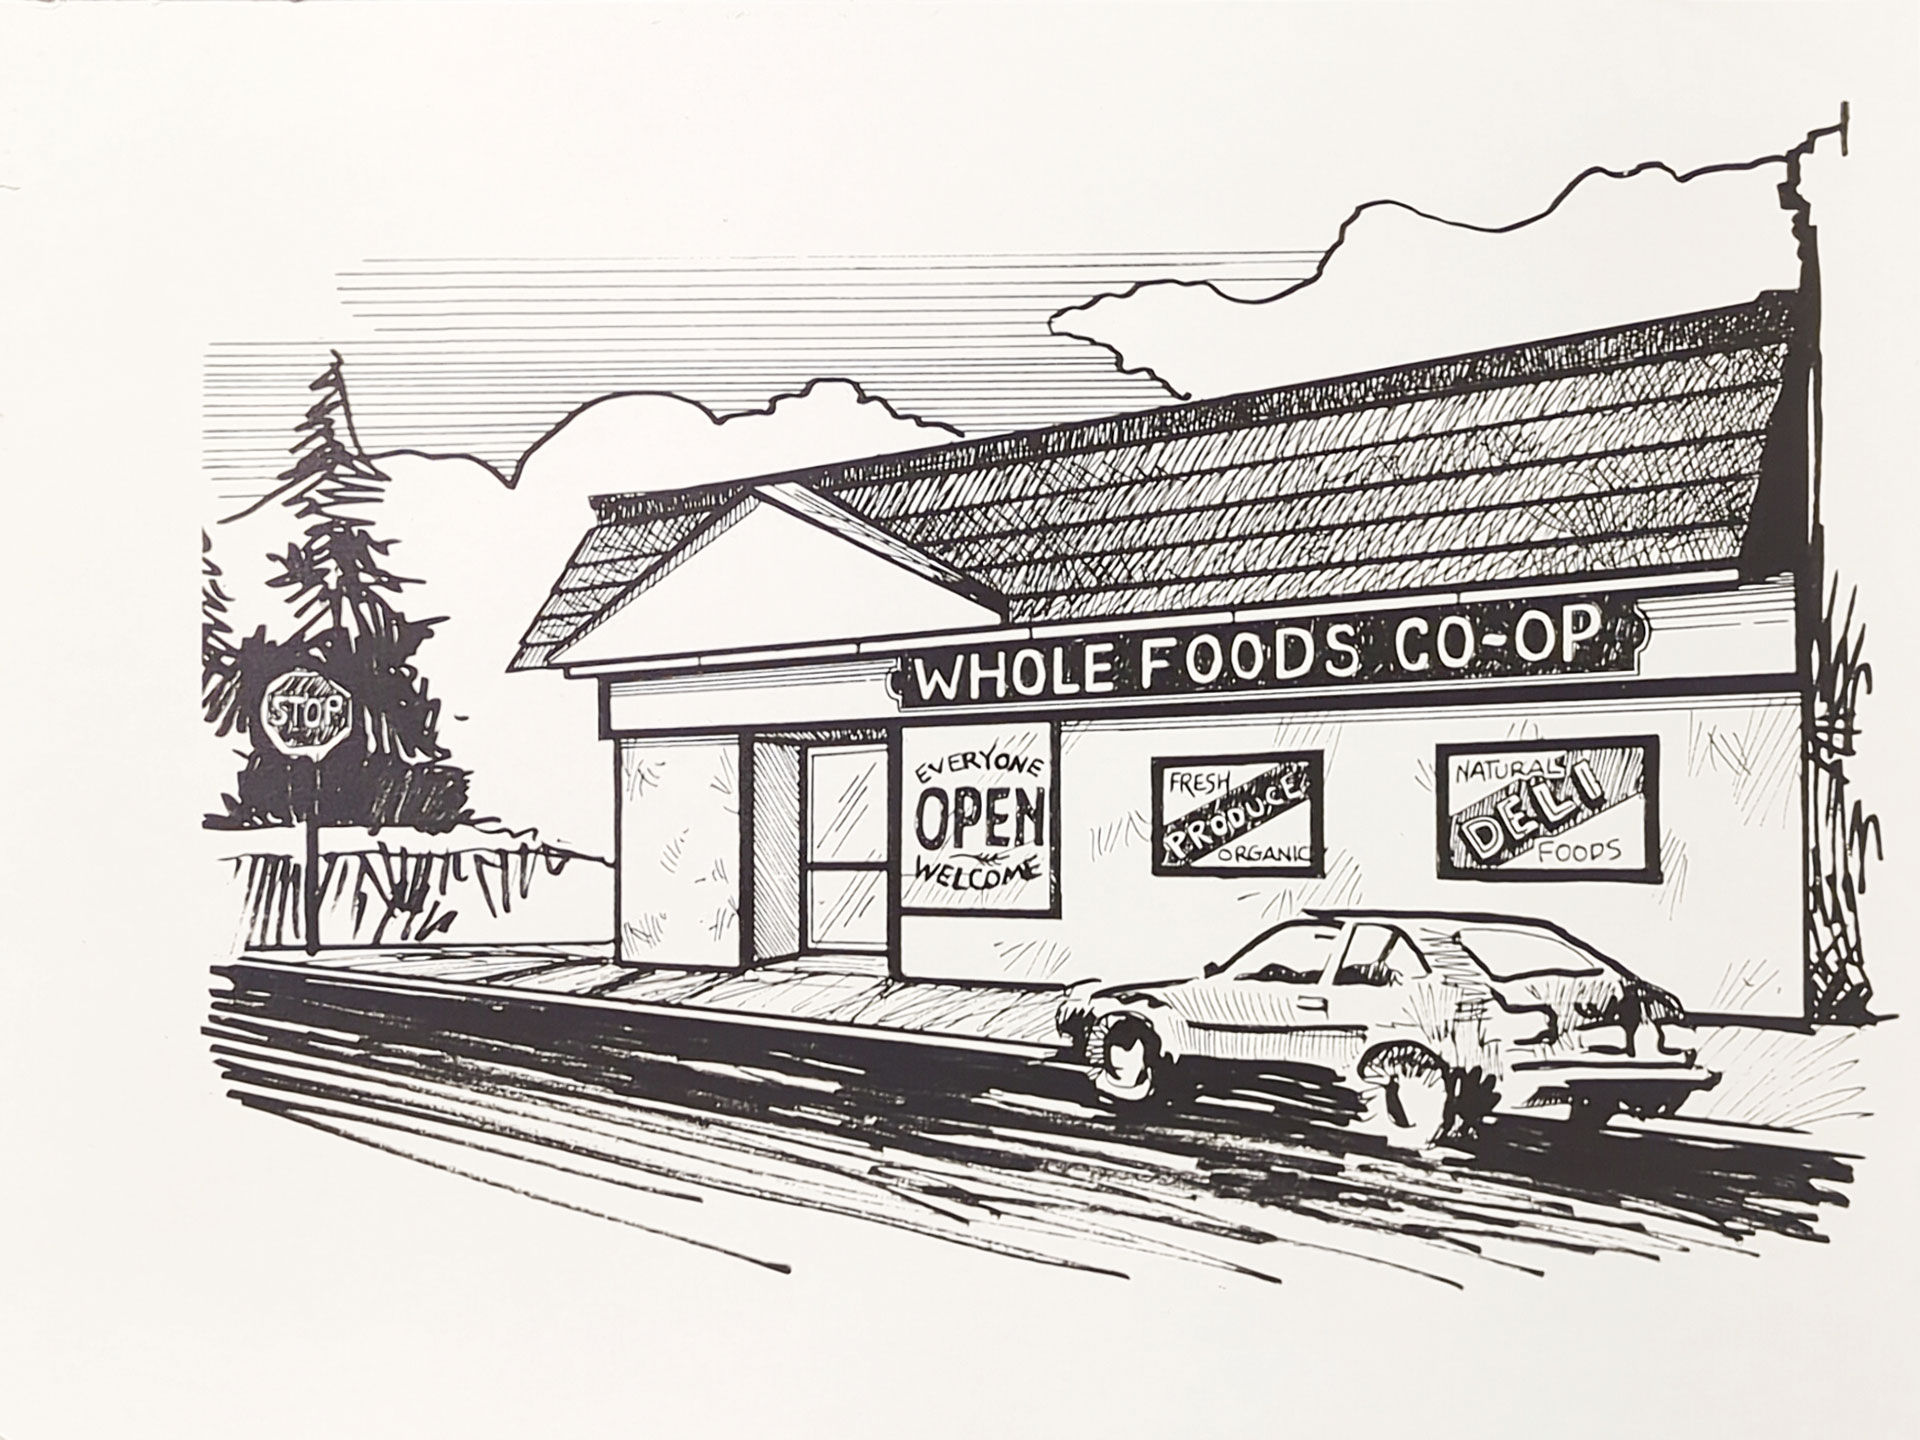 Black and white illustration of a small store labeled "Whole Foods Coop Duluth MN." Signs in the window read "Fresh Organic Produce," "Natural Foods," "Everyone Welcome," and "Open." A car is parked in front, and a stop sign is visible to the left of the building.